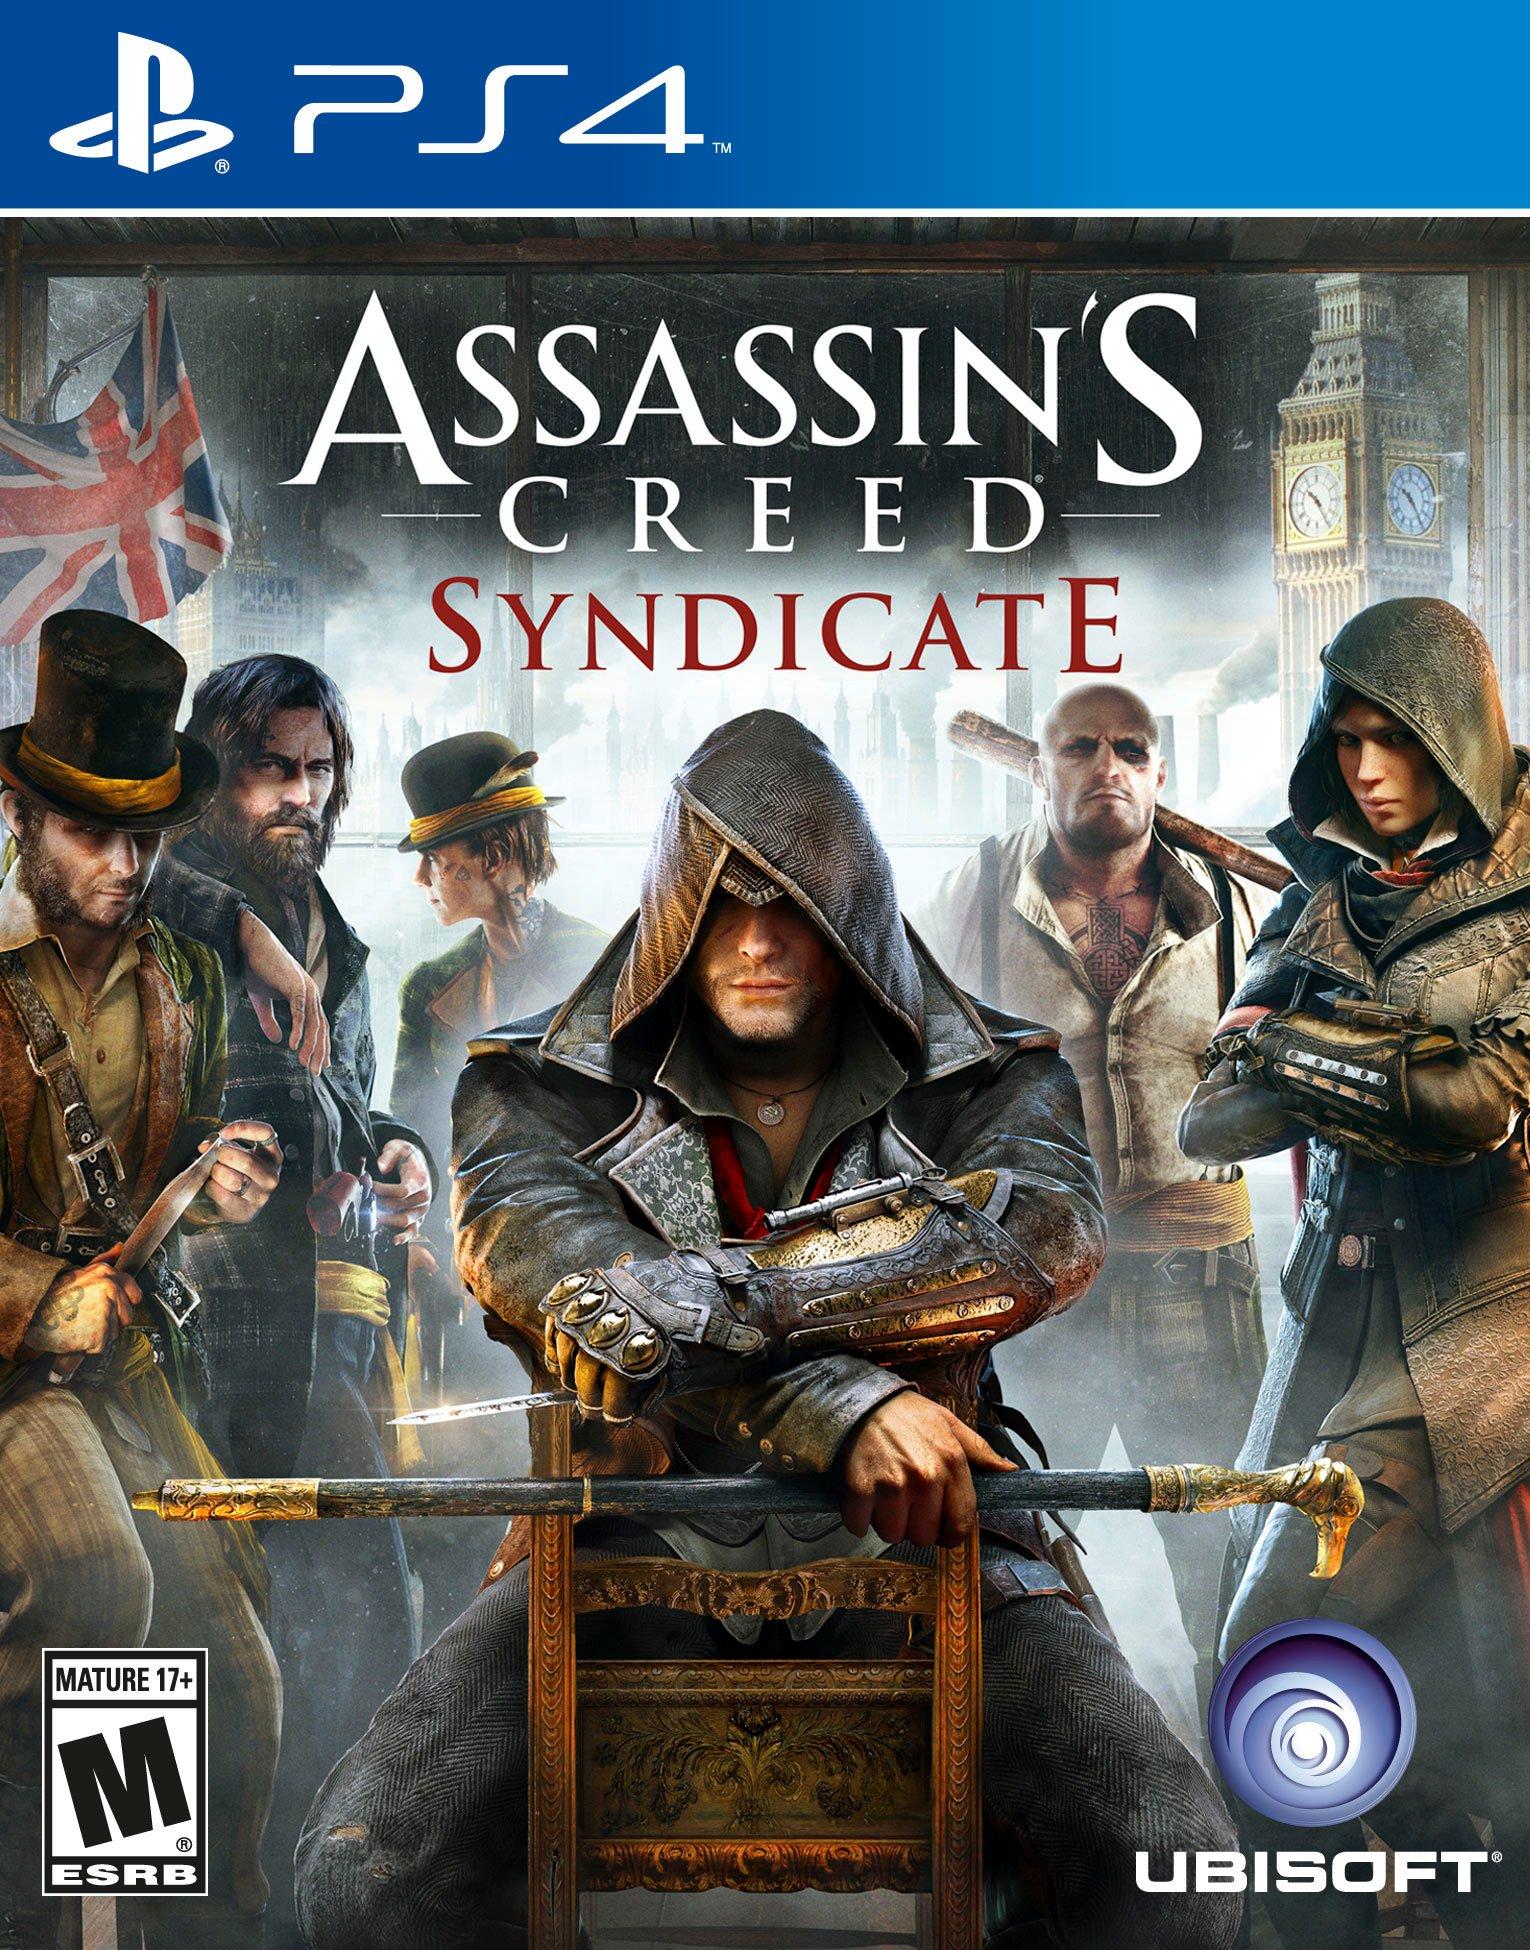 newest assassin's creed game ps4